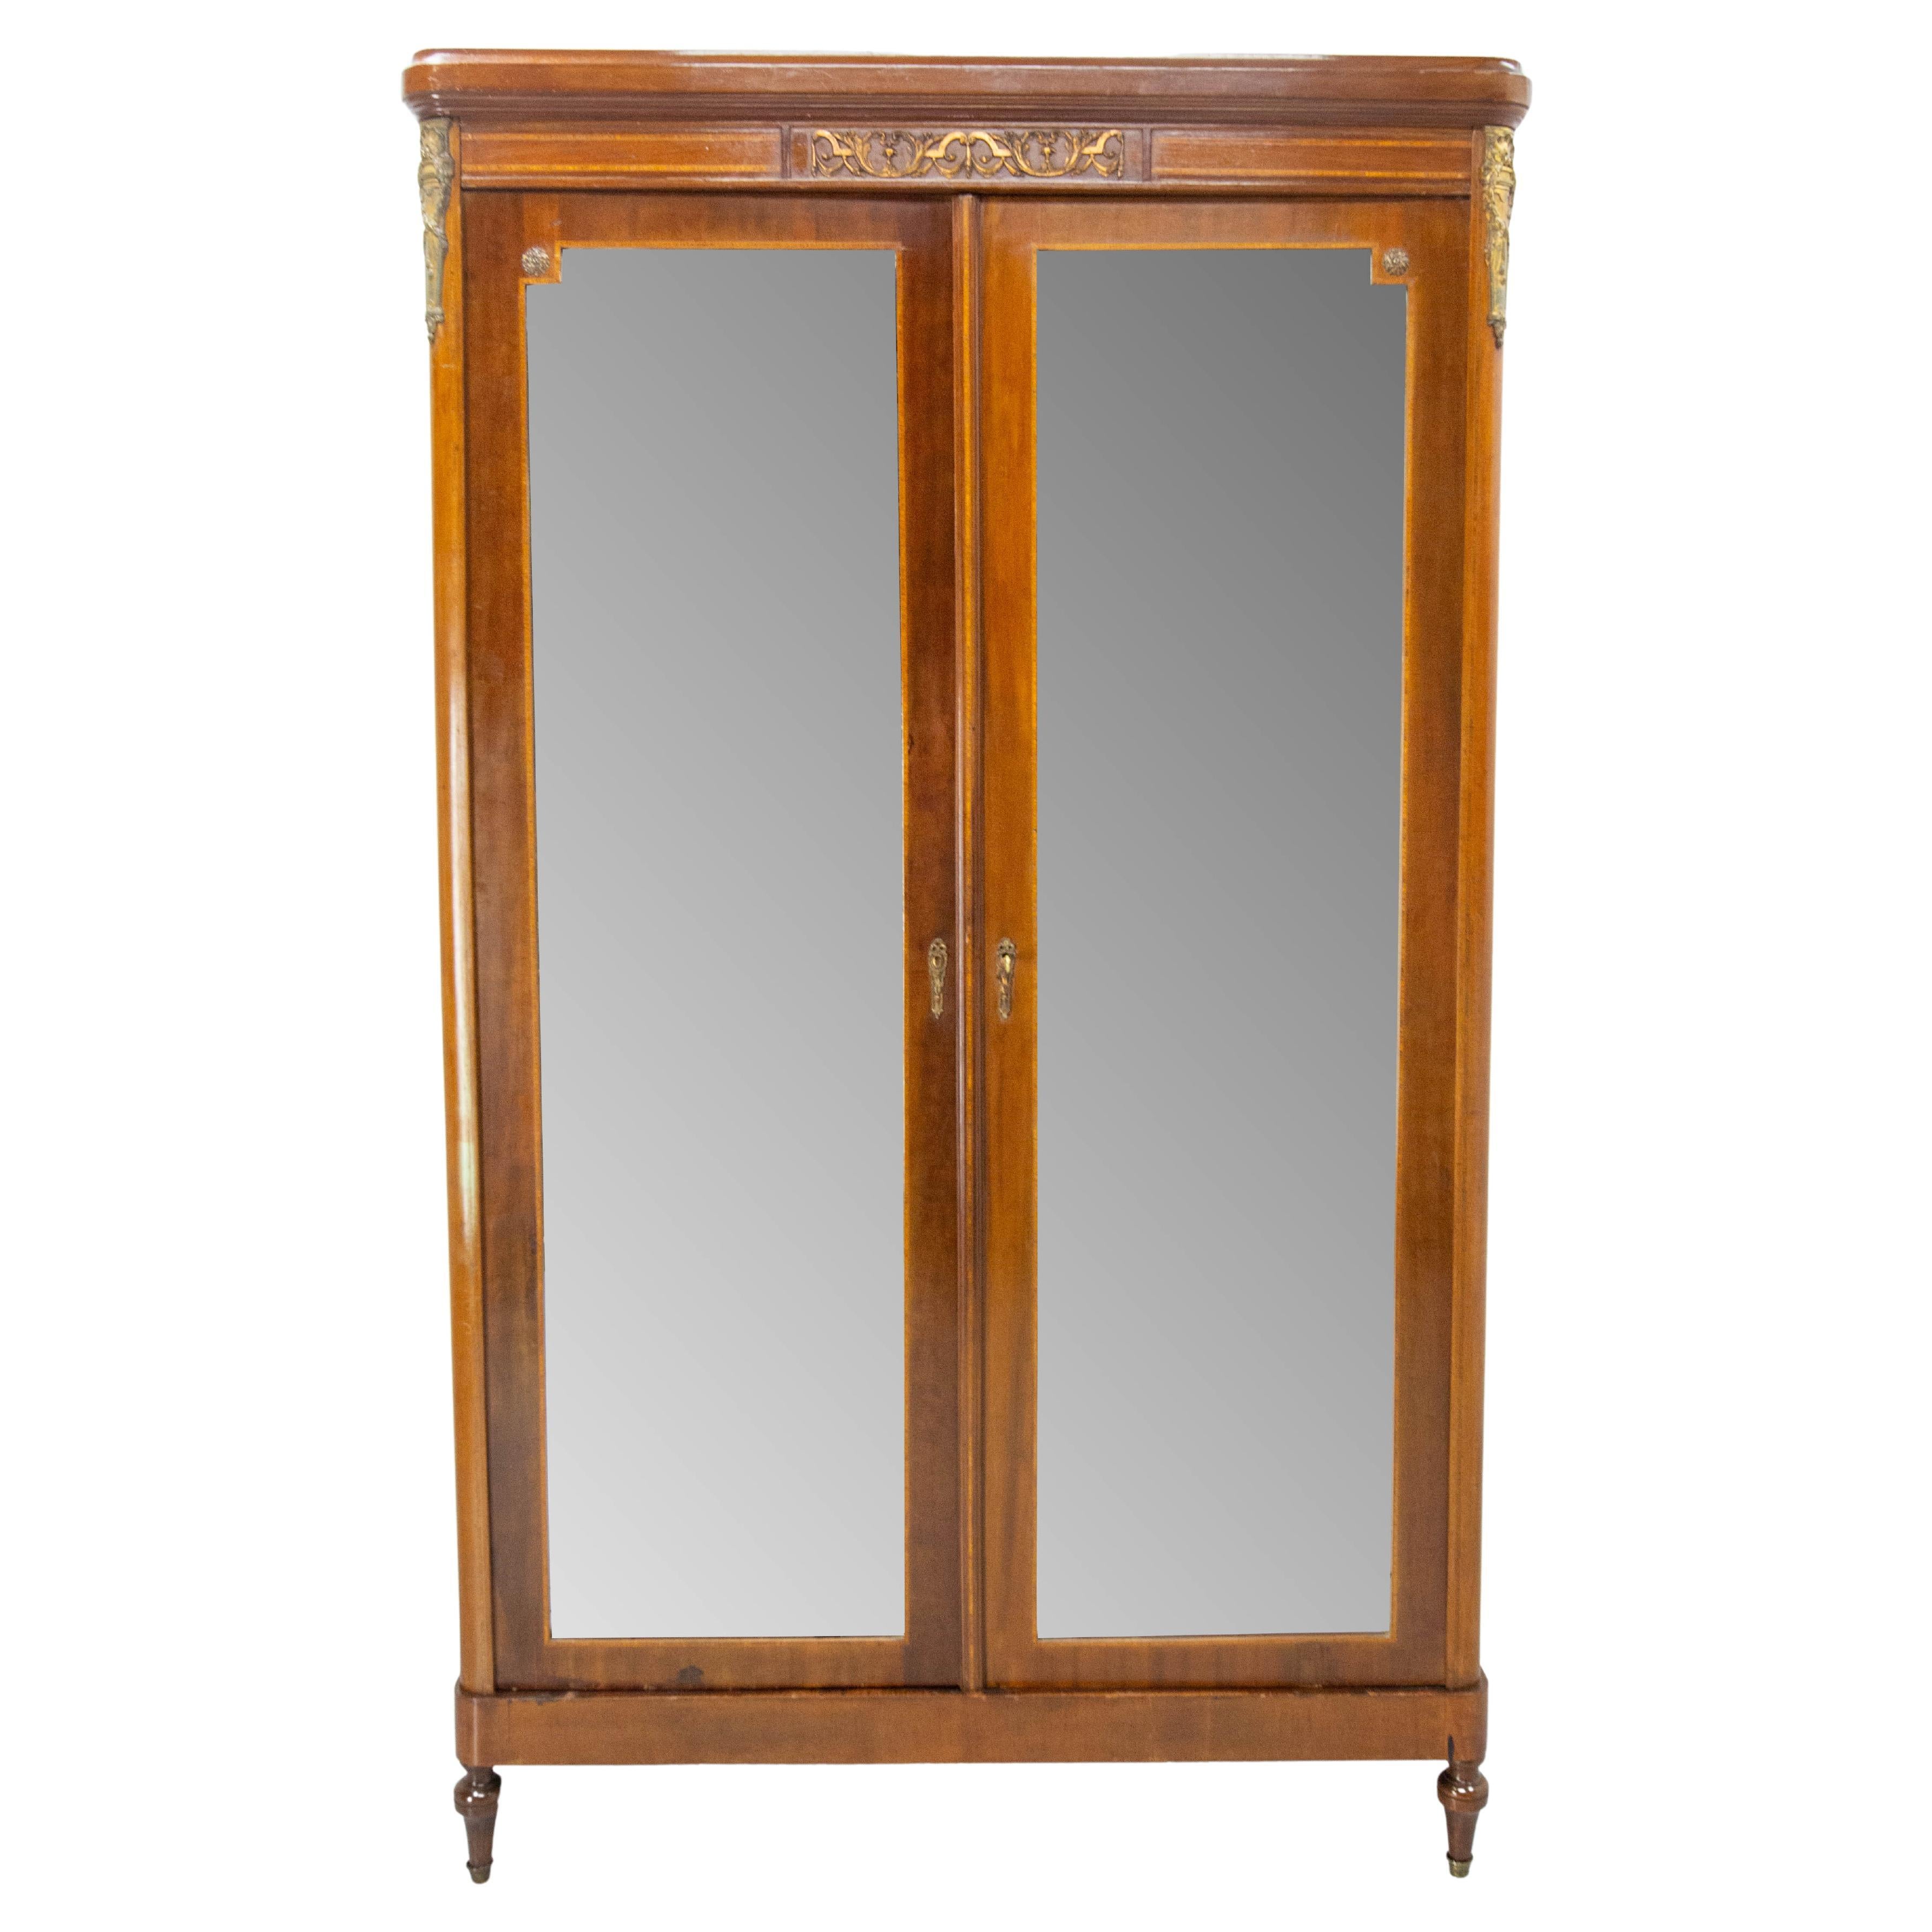 French Iroko & Brass Armoire Beveled Mirrors in the Louis 16 Revival Style, 1900 For Sale